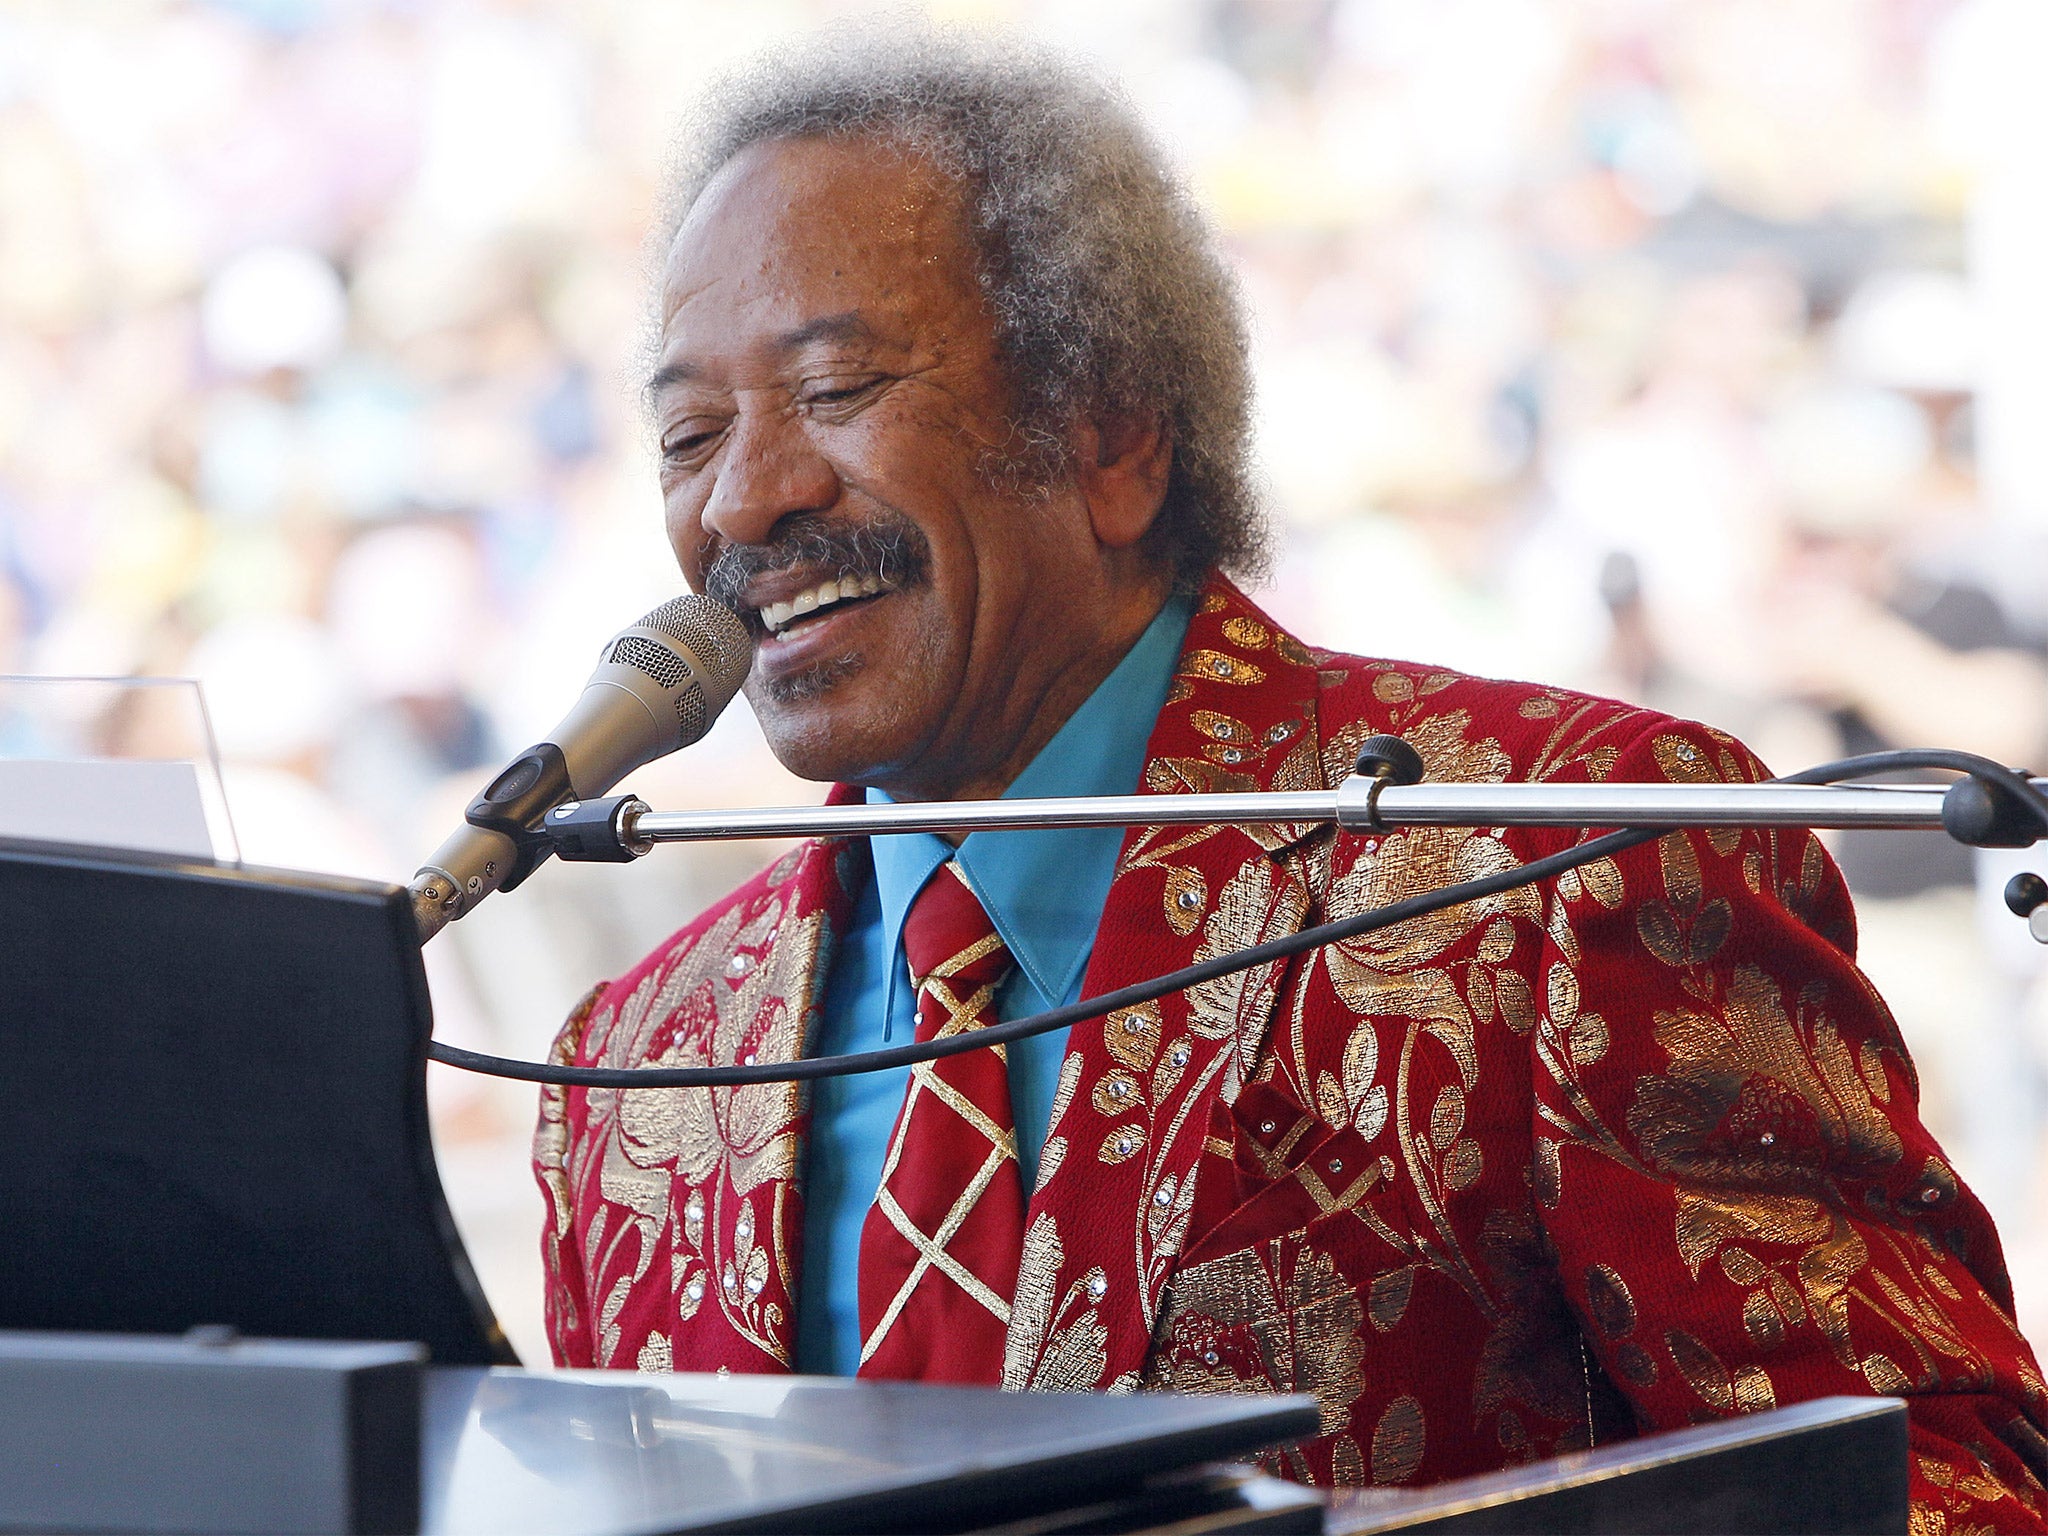 Toussaint in 2011 at the New Orleans Jazz and Heritage Festival